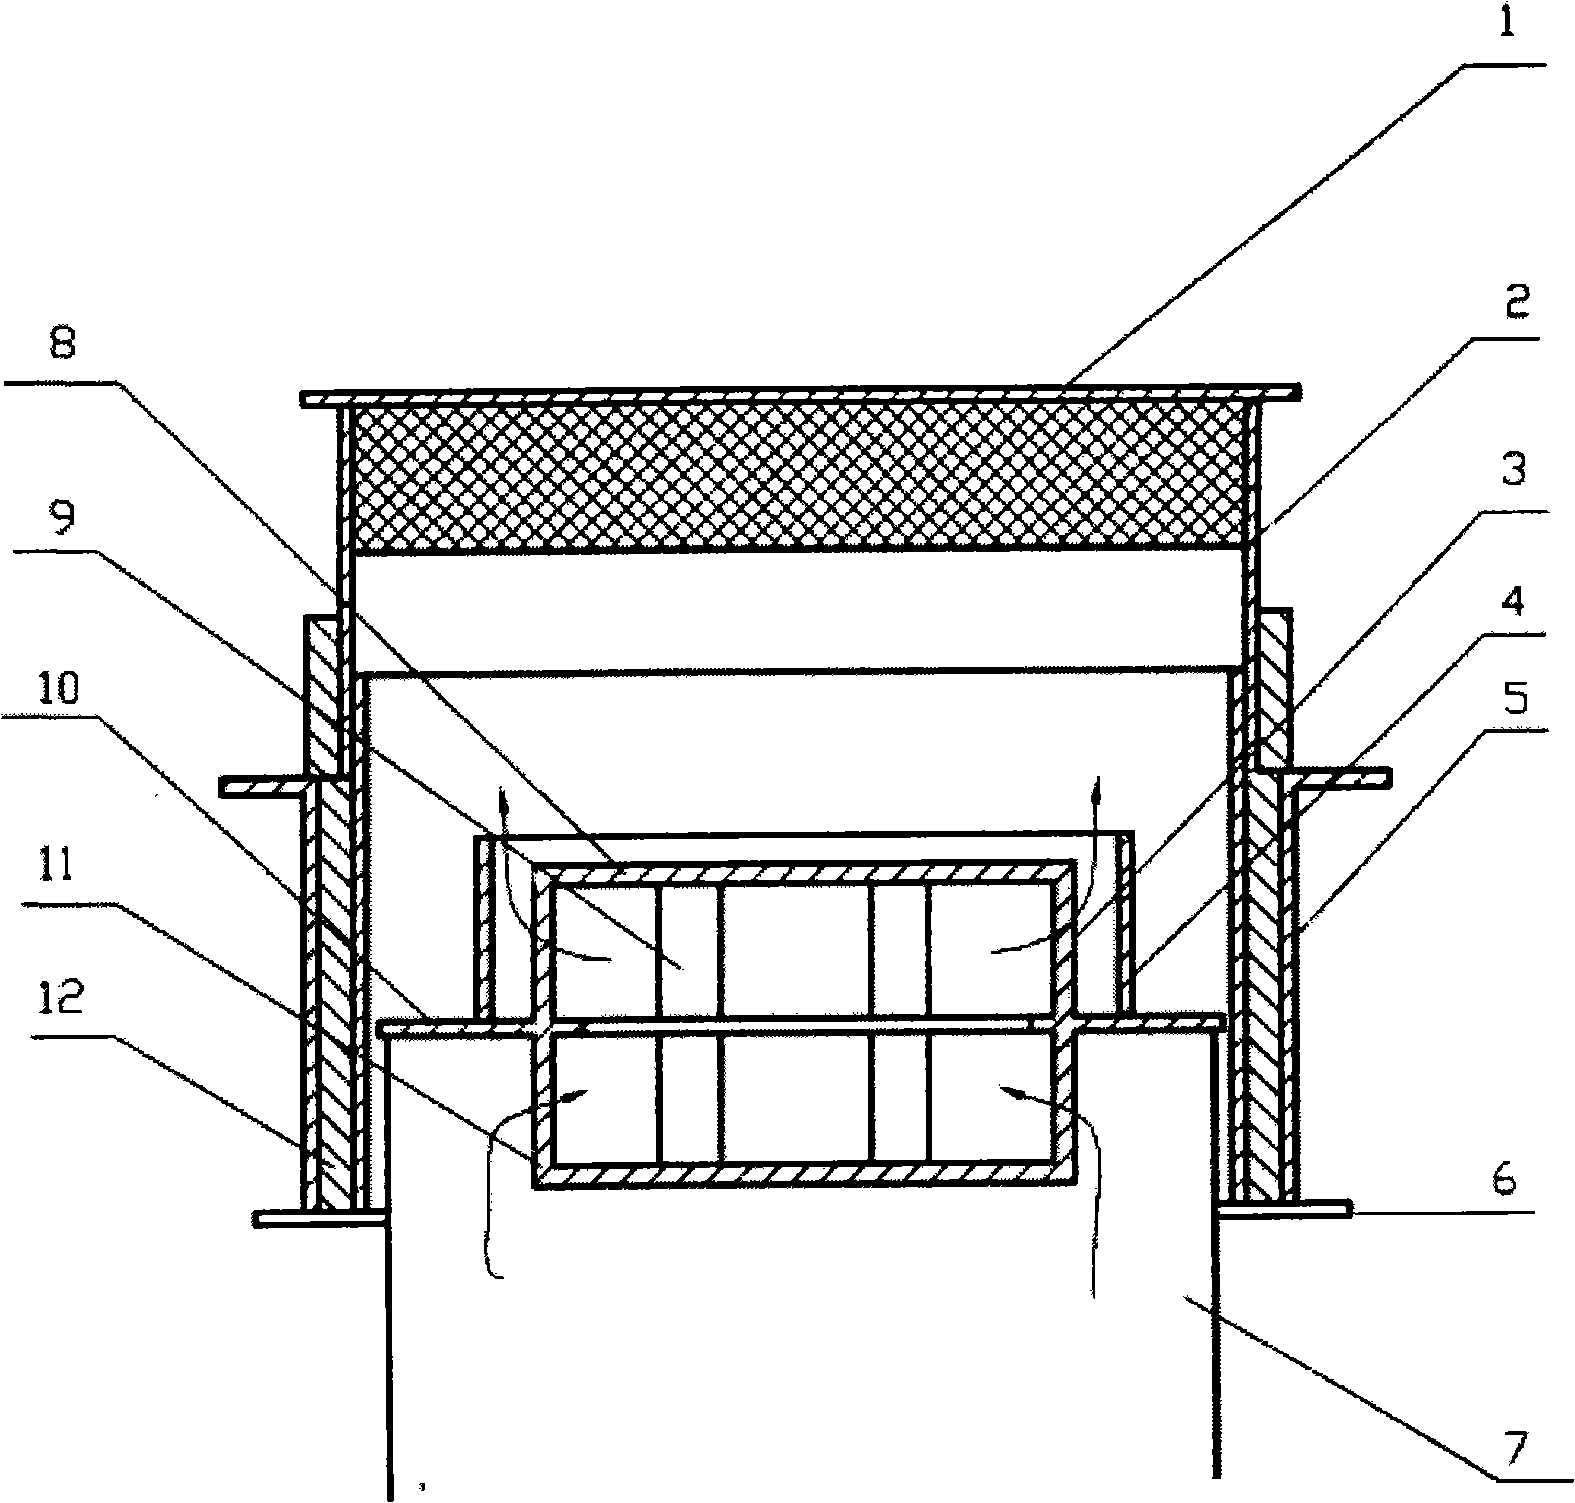 Process for preparing high pure rare earth metals by layered distillation method and device